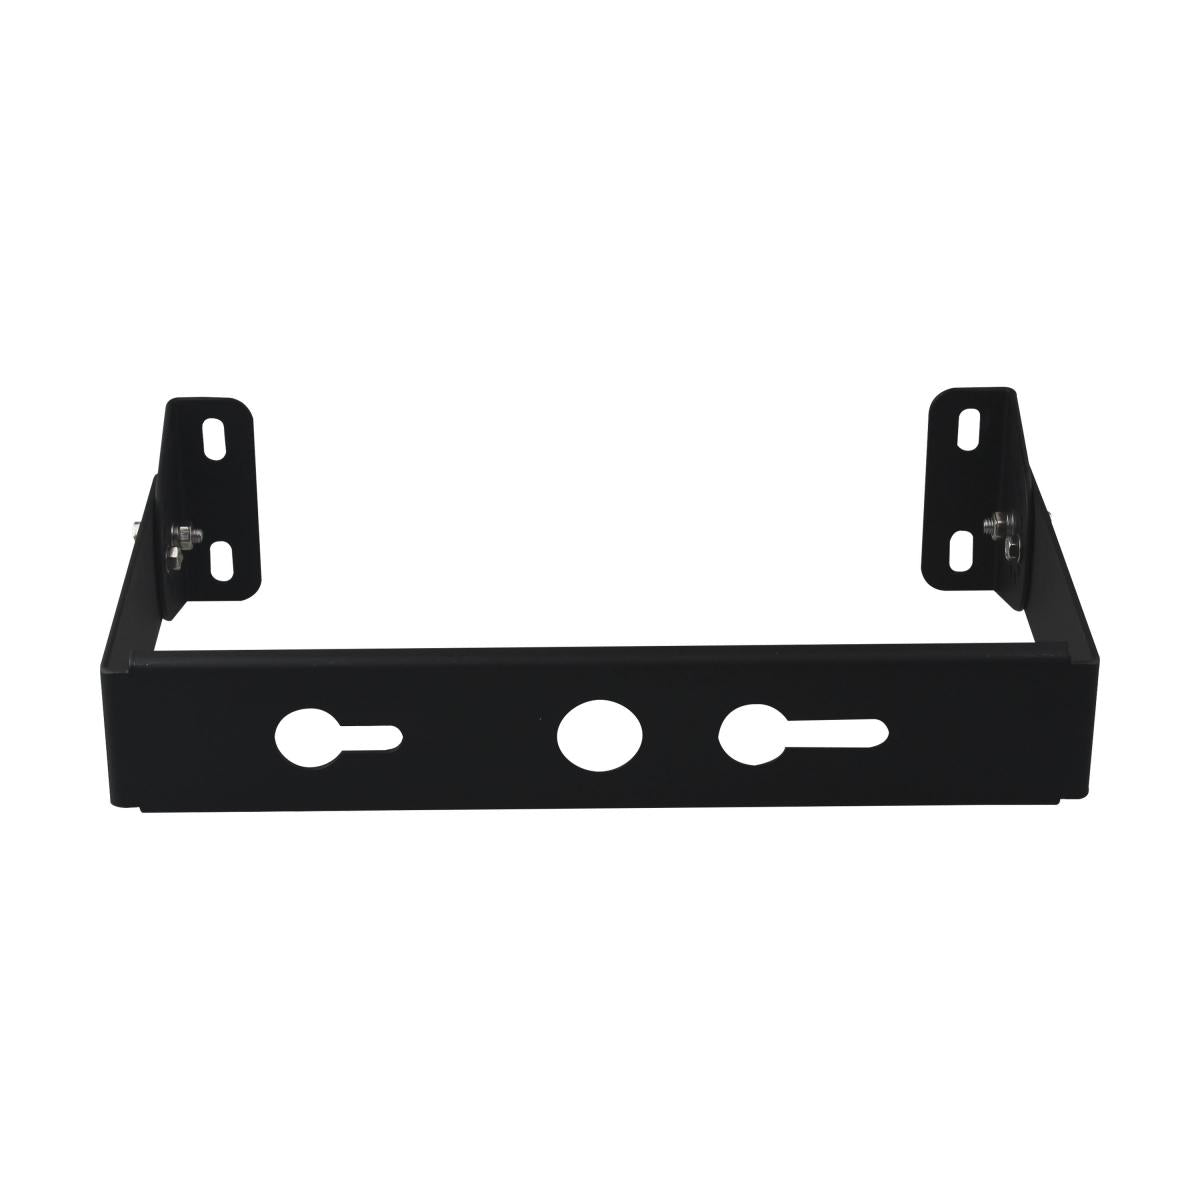 Satco 65-765 Yoke Mount Bracket Black Finish For Use With Gen 2 100W/150W & CCT & Wattage Selectable UFO High Bay Fixtures